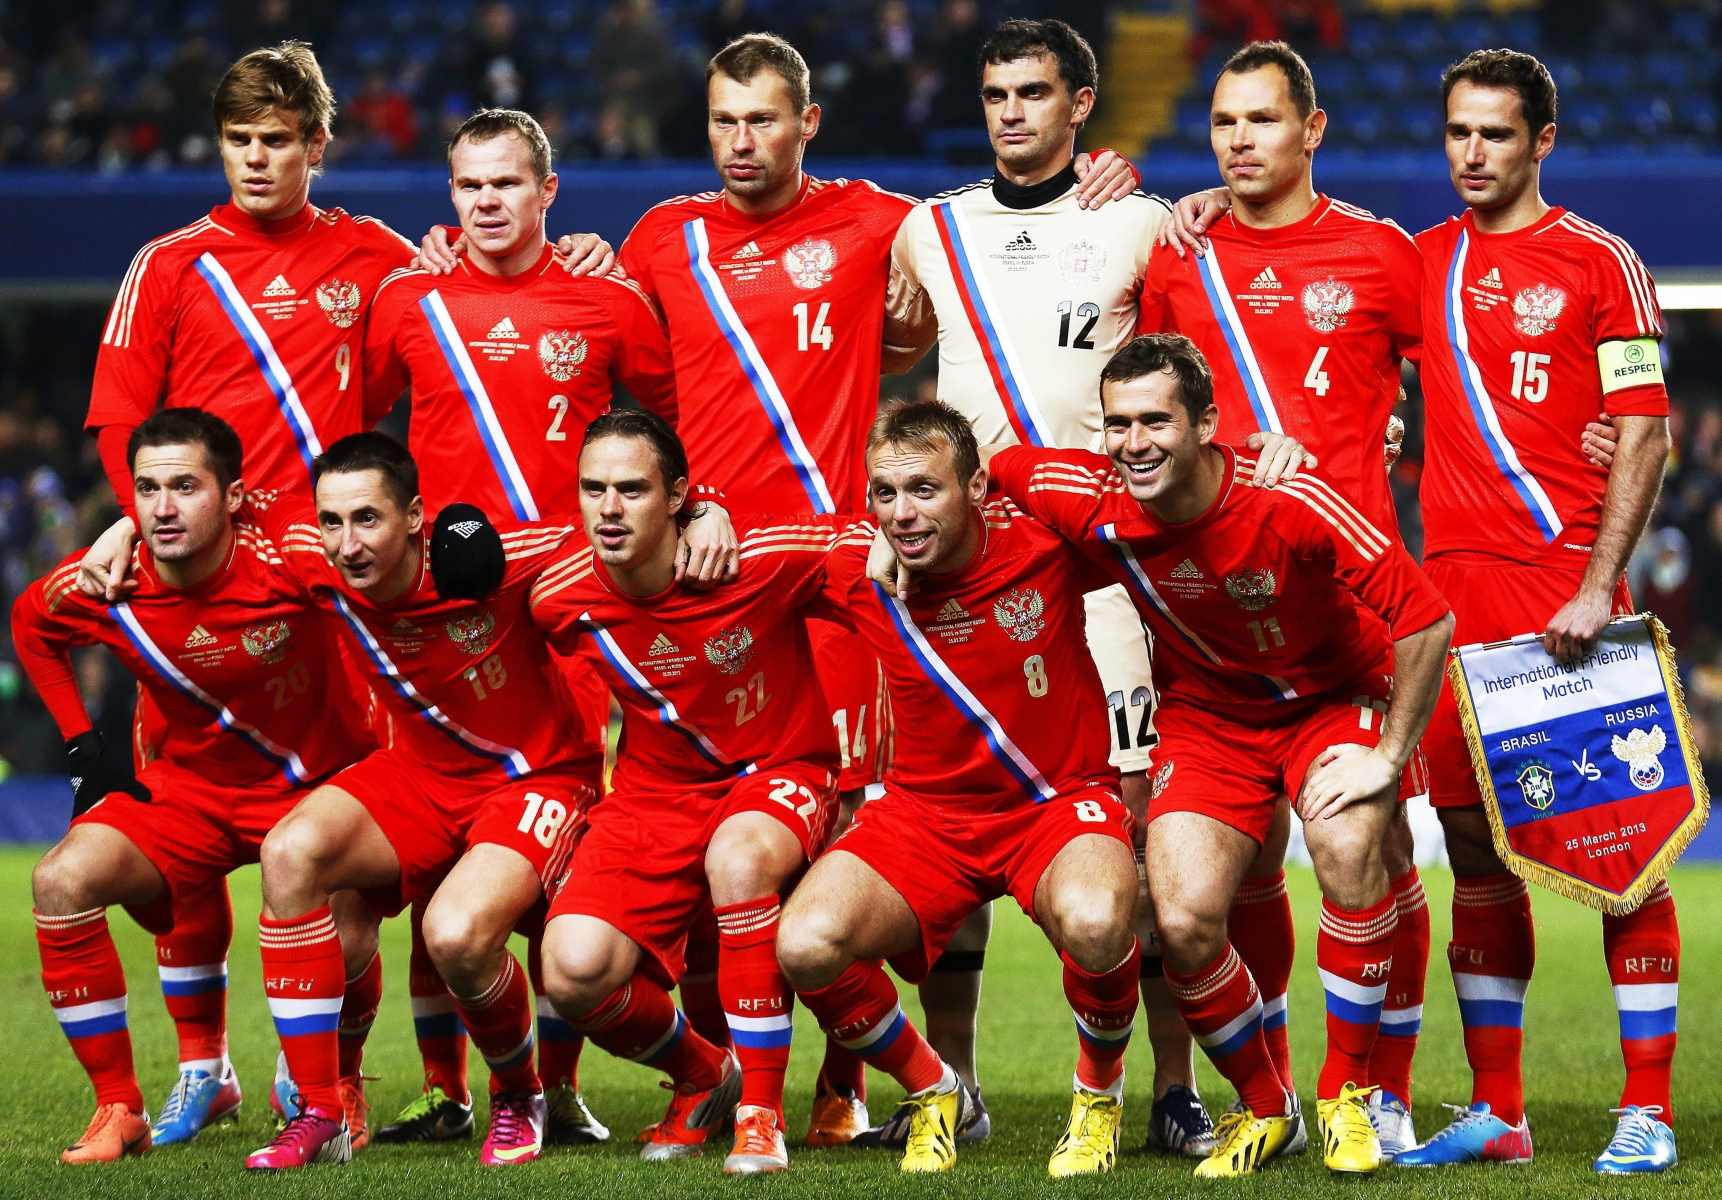 La sélection russe se retrouve privée de son capitaine (n° 15).

Picture taken on 25 March 2013 shows Russian national soccer team players (front row, L-R) Viktor Faizulin, Vladimir Bystrov, Andrey Yeshchenko, Denis Glushakov and Aleksandr Kerzhakov; (back row, L-R) Aleksandr Kokorin, Aleksandr Anyukov, Vasili Berezutski, goalkeeper Vladimir Gabulov, Sergei Ignashevich and captain Roman Shirokov posing for photographers before the international friendly soccer match between Brazil and Russia at Stamford Bridge in London, Britain. Team Russia is among the 32 squads that qualified for the FIFA World Cup 2014 in Brazil.  EPA/KERIM OKTEN *** Local Caption *** 50769202